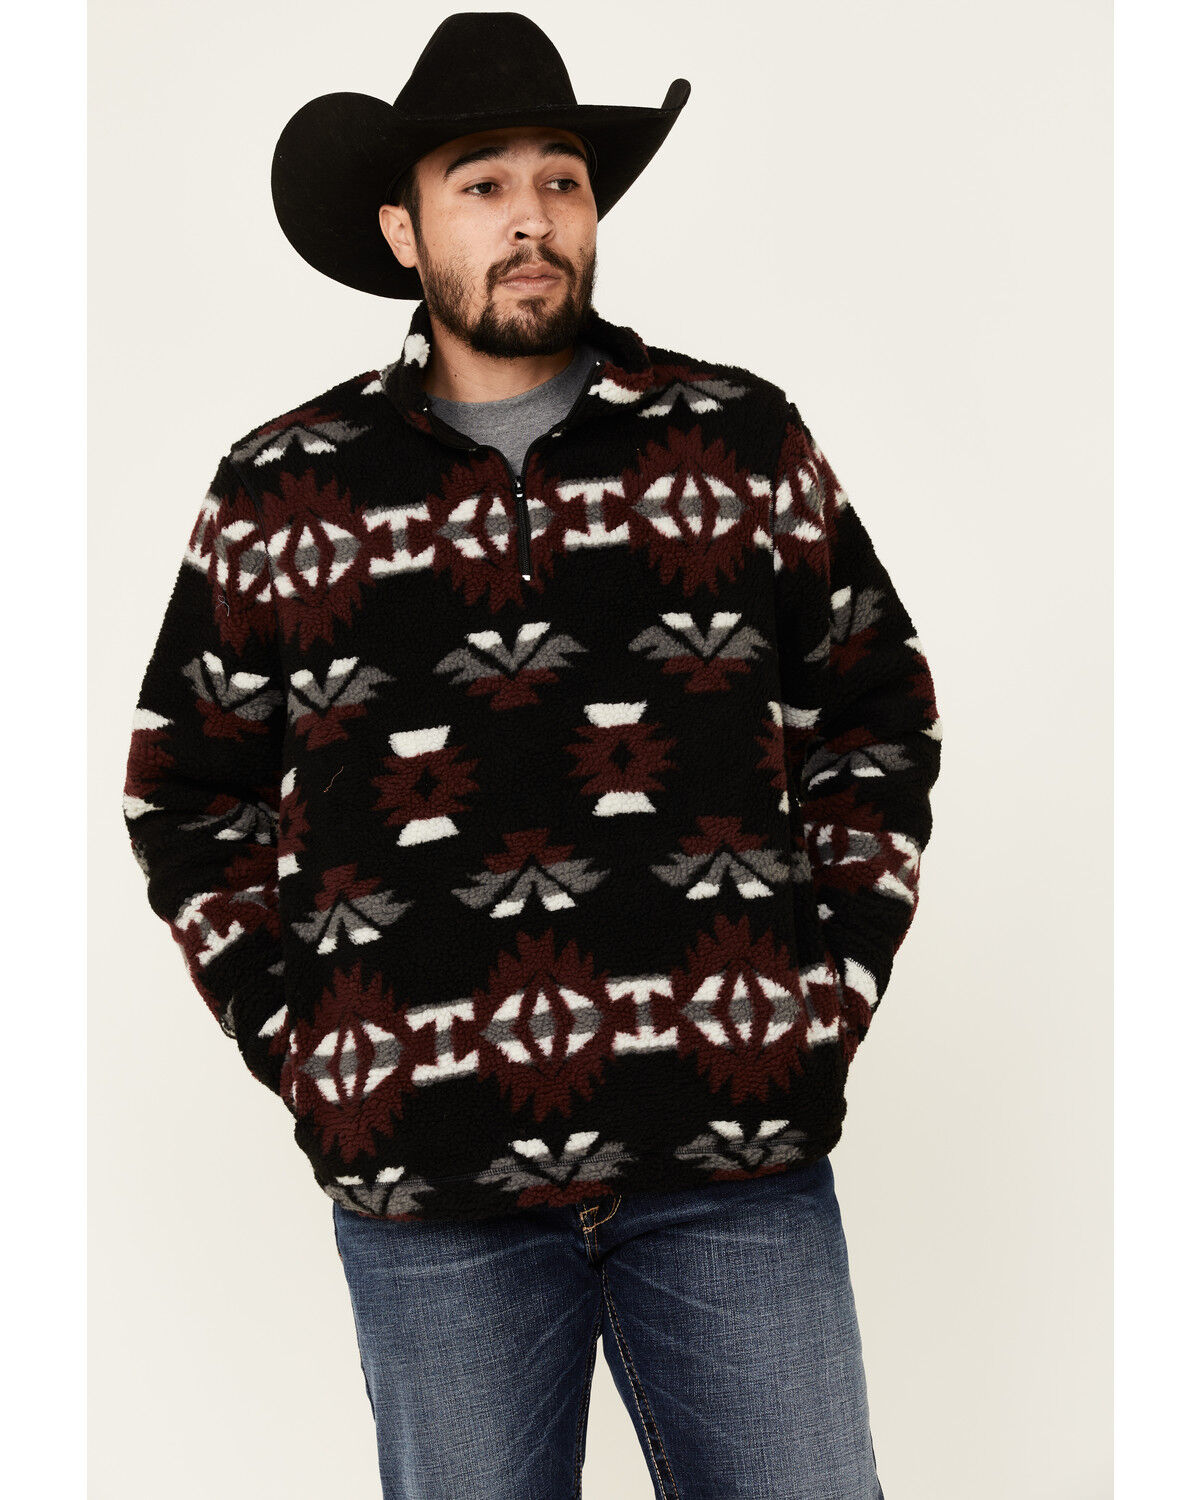 Wrangler Sherpa Pullover Discount, SAVE 58% 